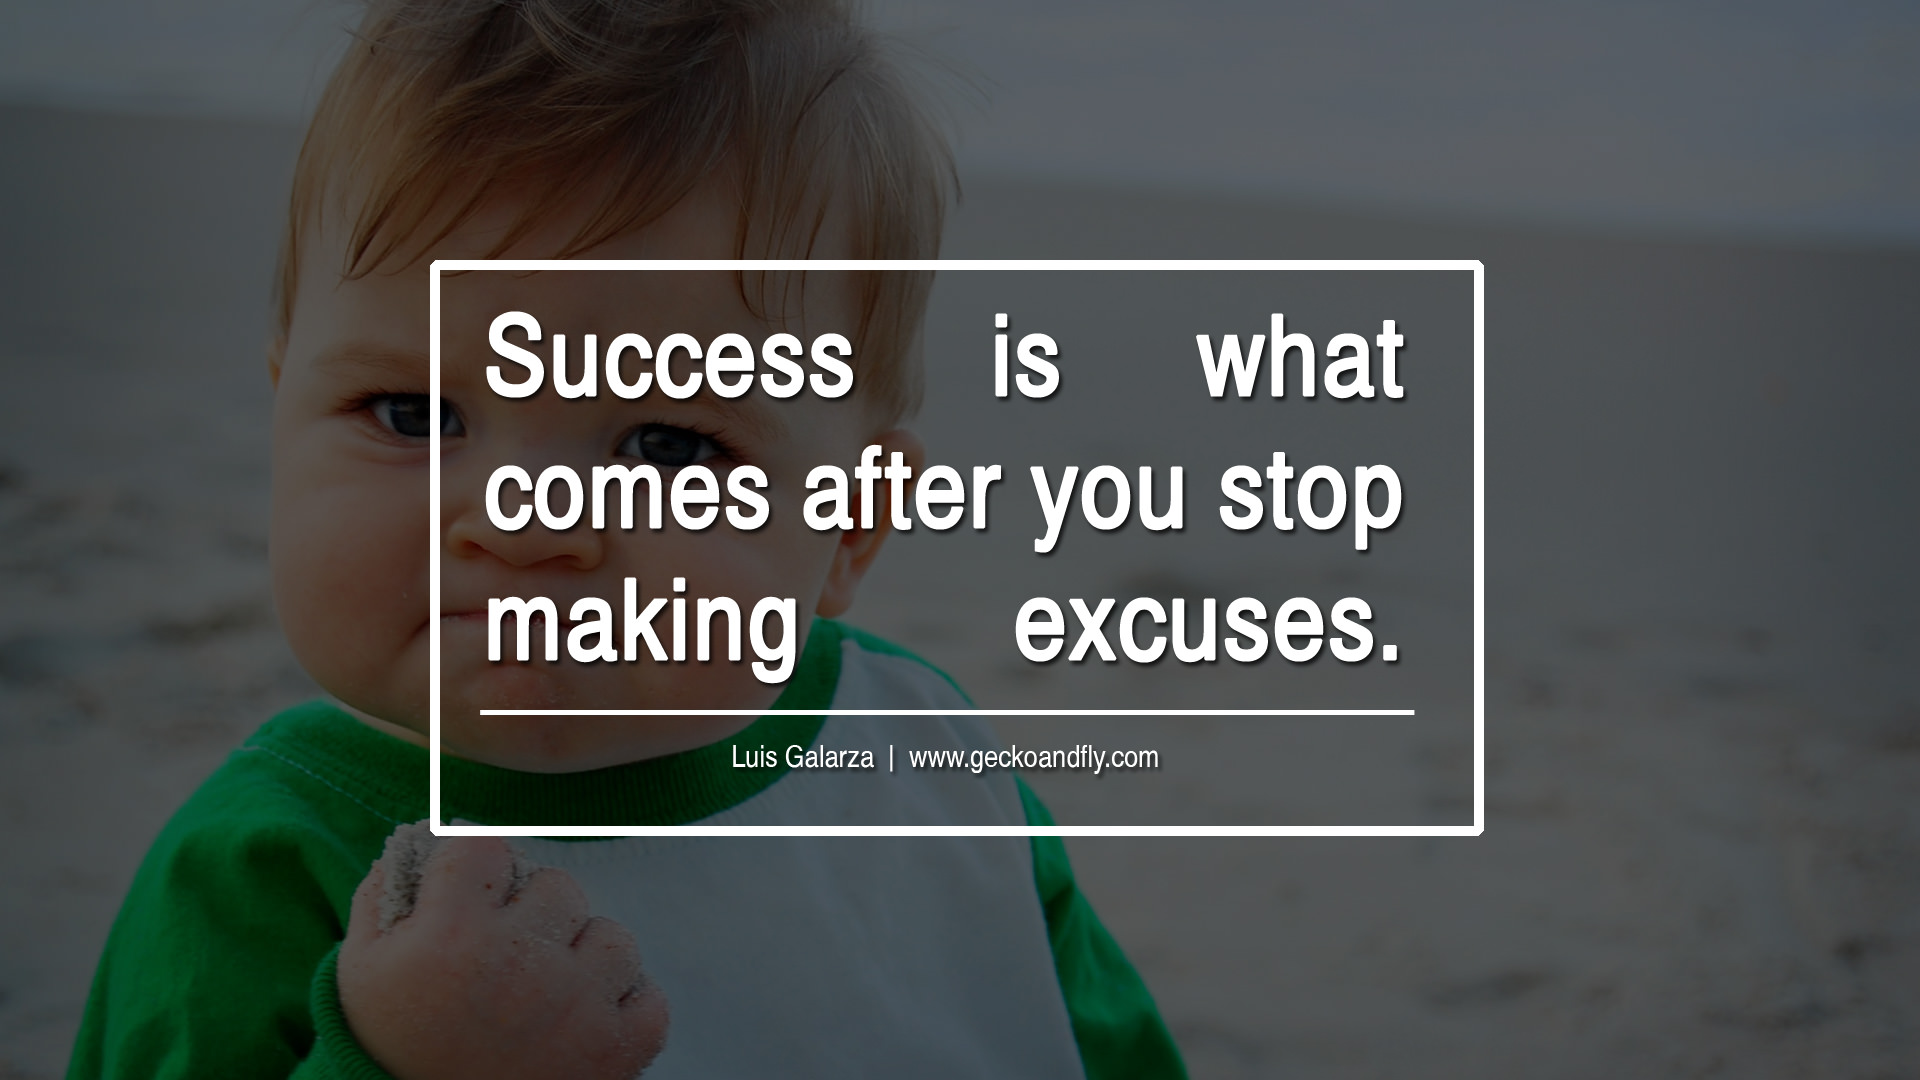 Business Opportunity Inspirational Quotes About Excuses. QuotesGram